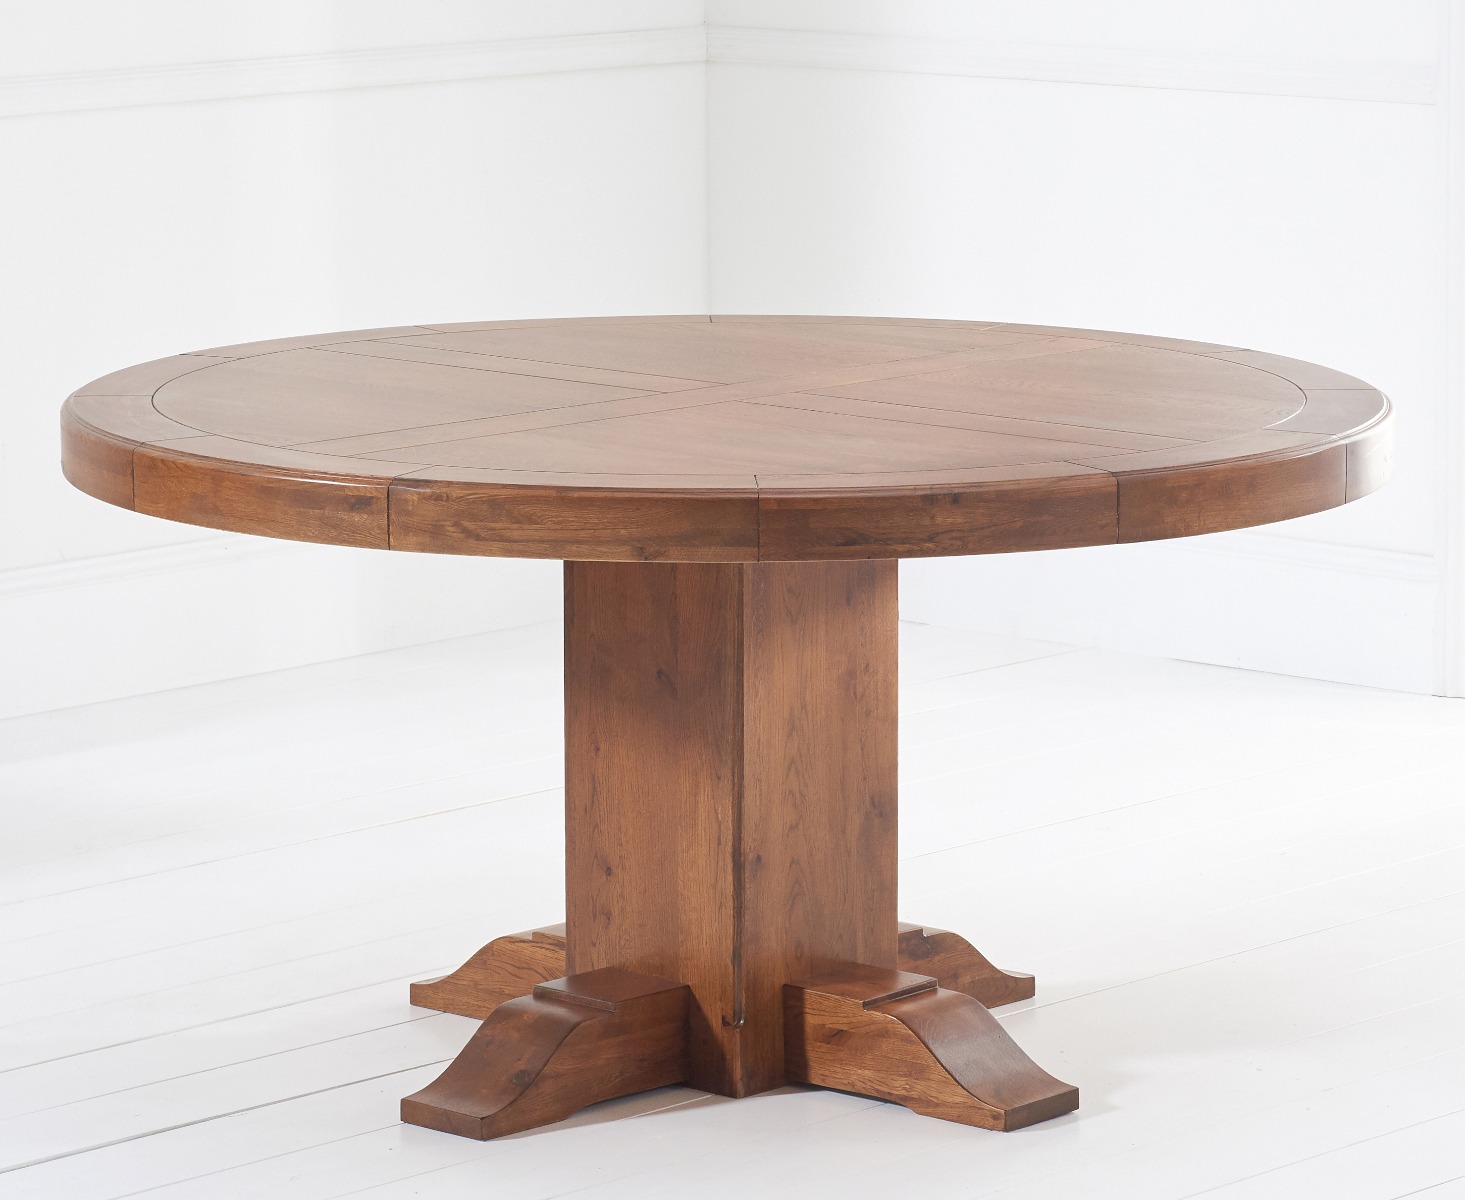 Photo 4 of Helmsley 150cm dark oak round pedestal dining table with 8 grey keswick chairs